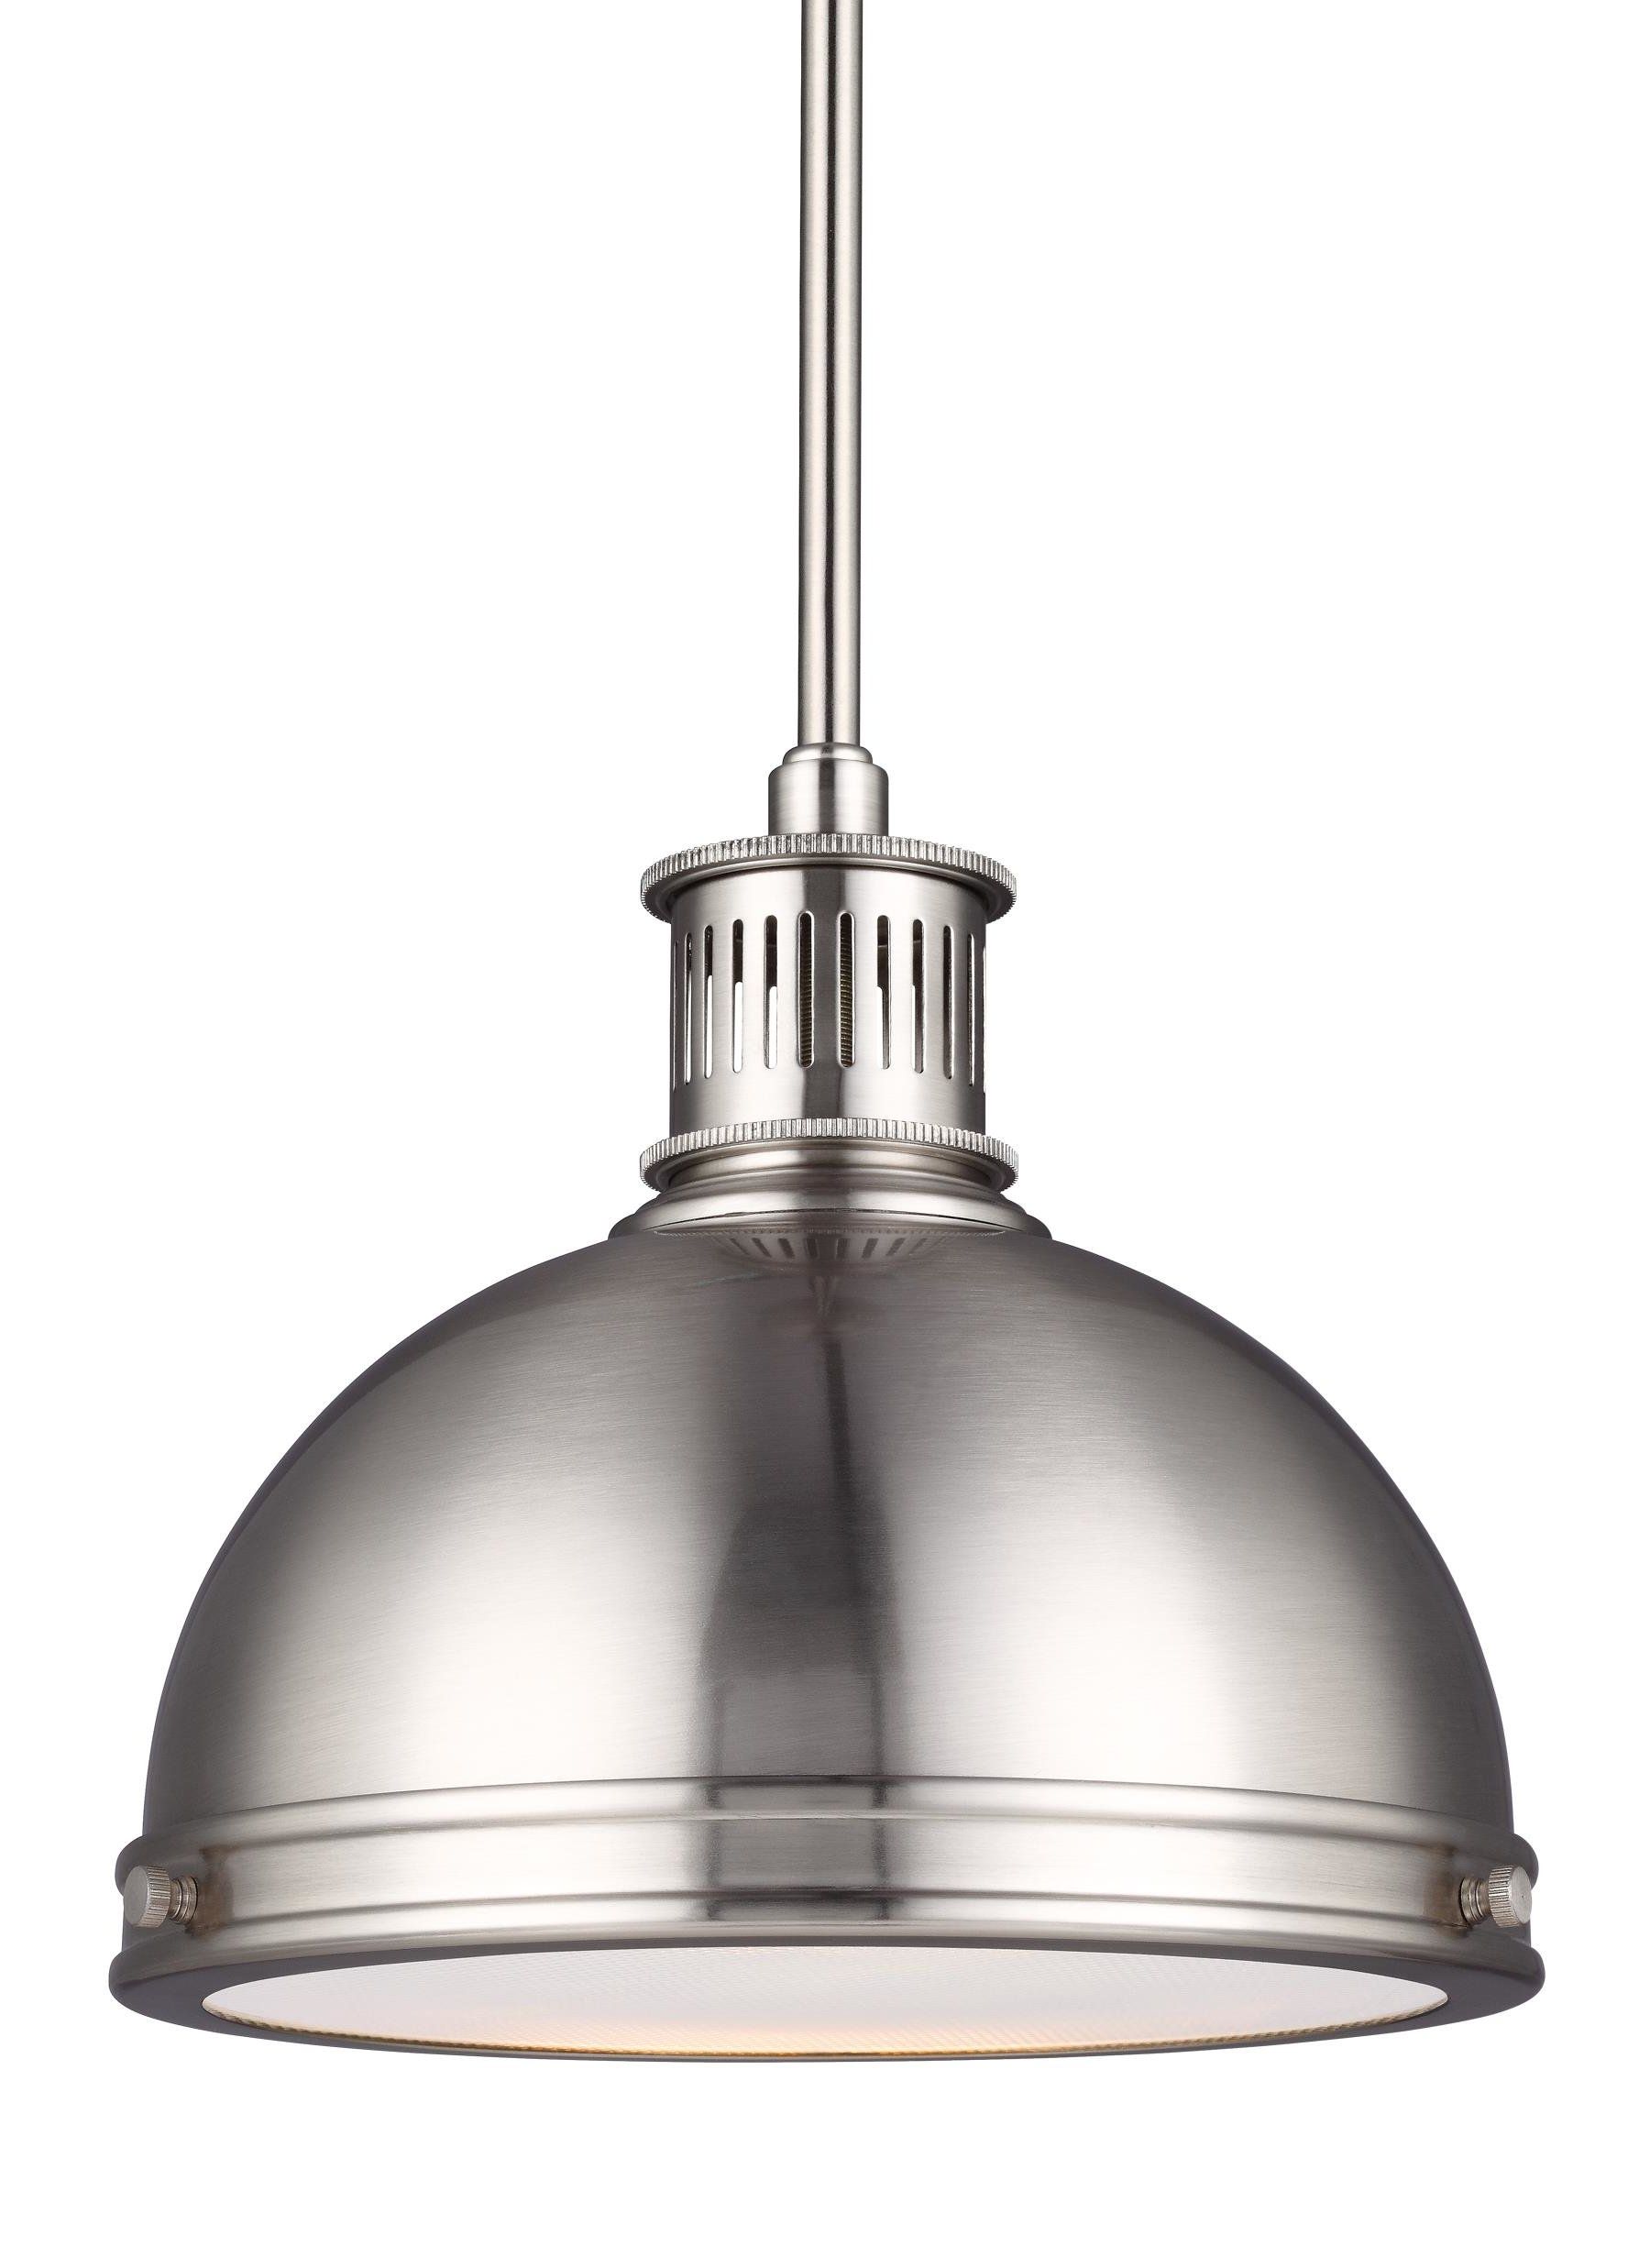 Widely Used Ninette 1 Light Dome Pendants Regarding Orchard Hill 1 Light Led Dome Pendant (View 11 of 25)